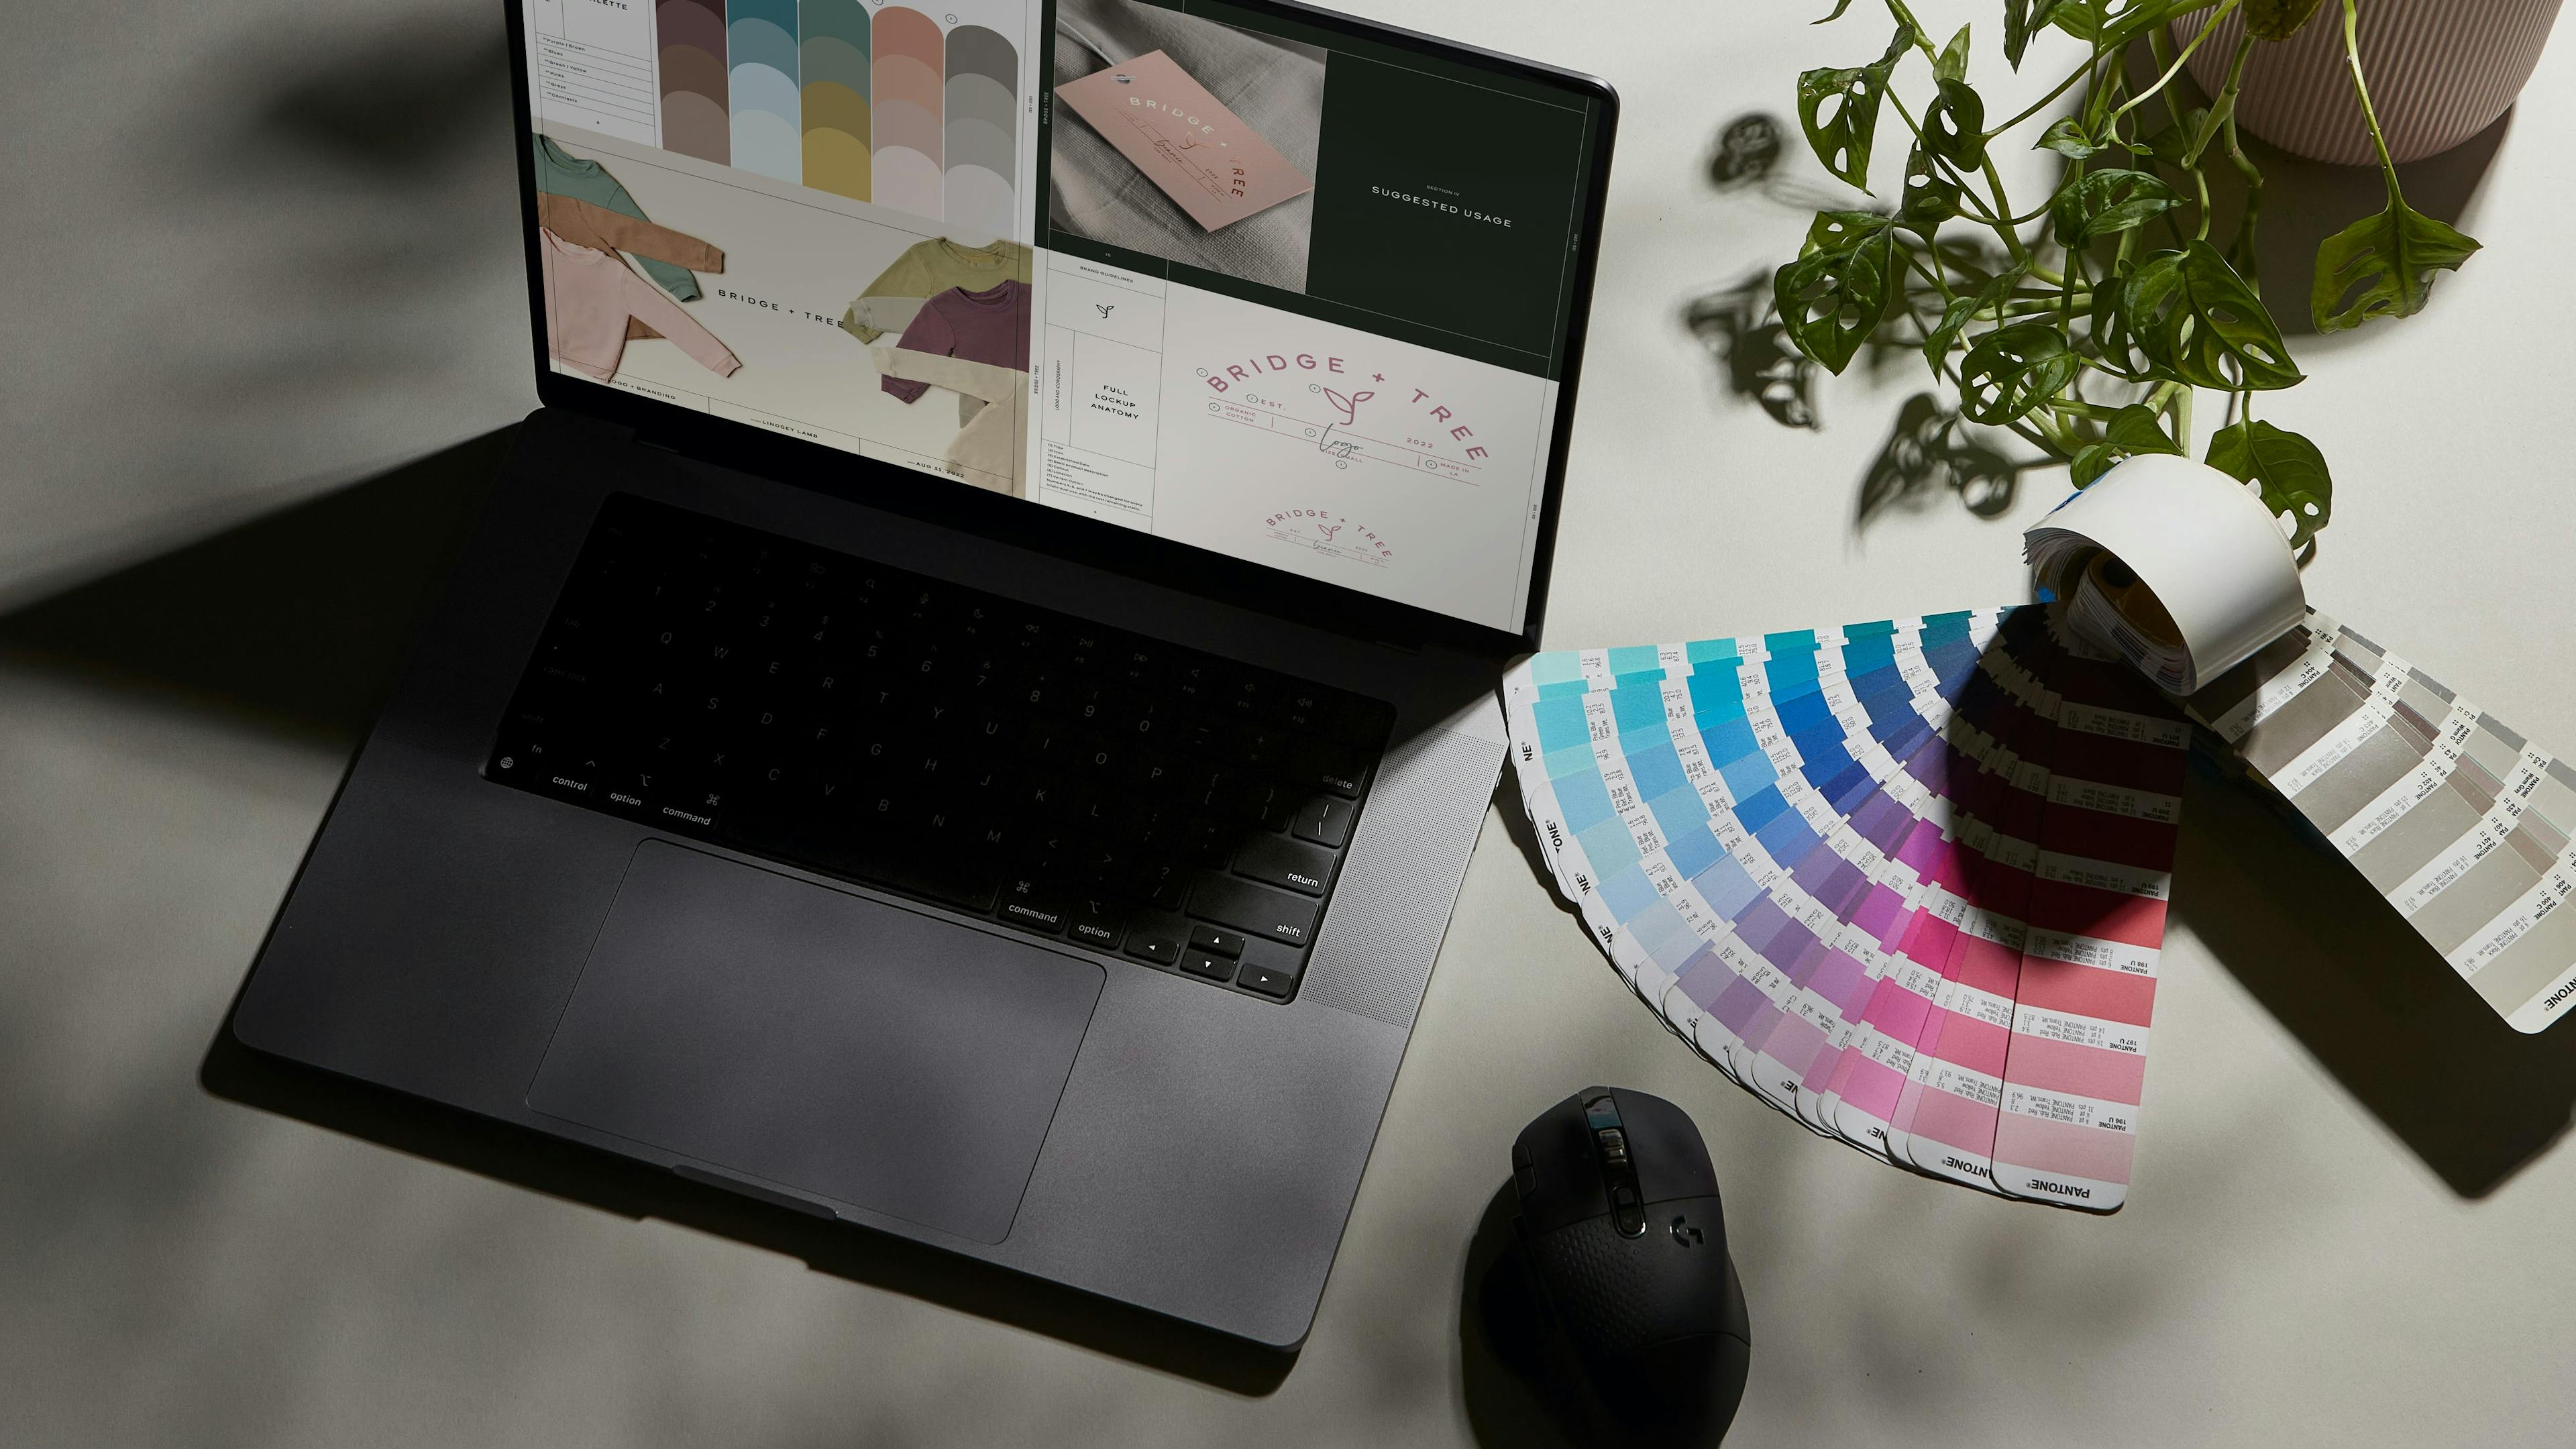 An overhead shot of a desk is shown with a laptop and a plant. A color swatch and branding materials are also visible on the desk, suggesting an identity design project in progress.